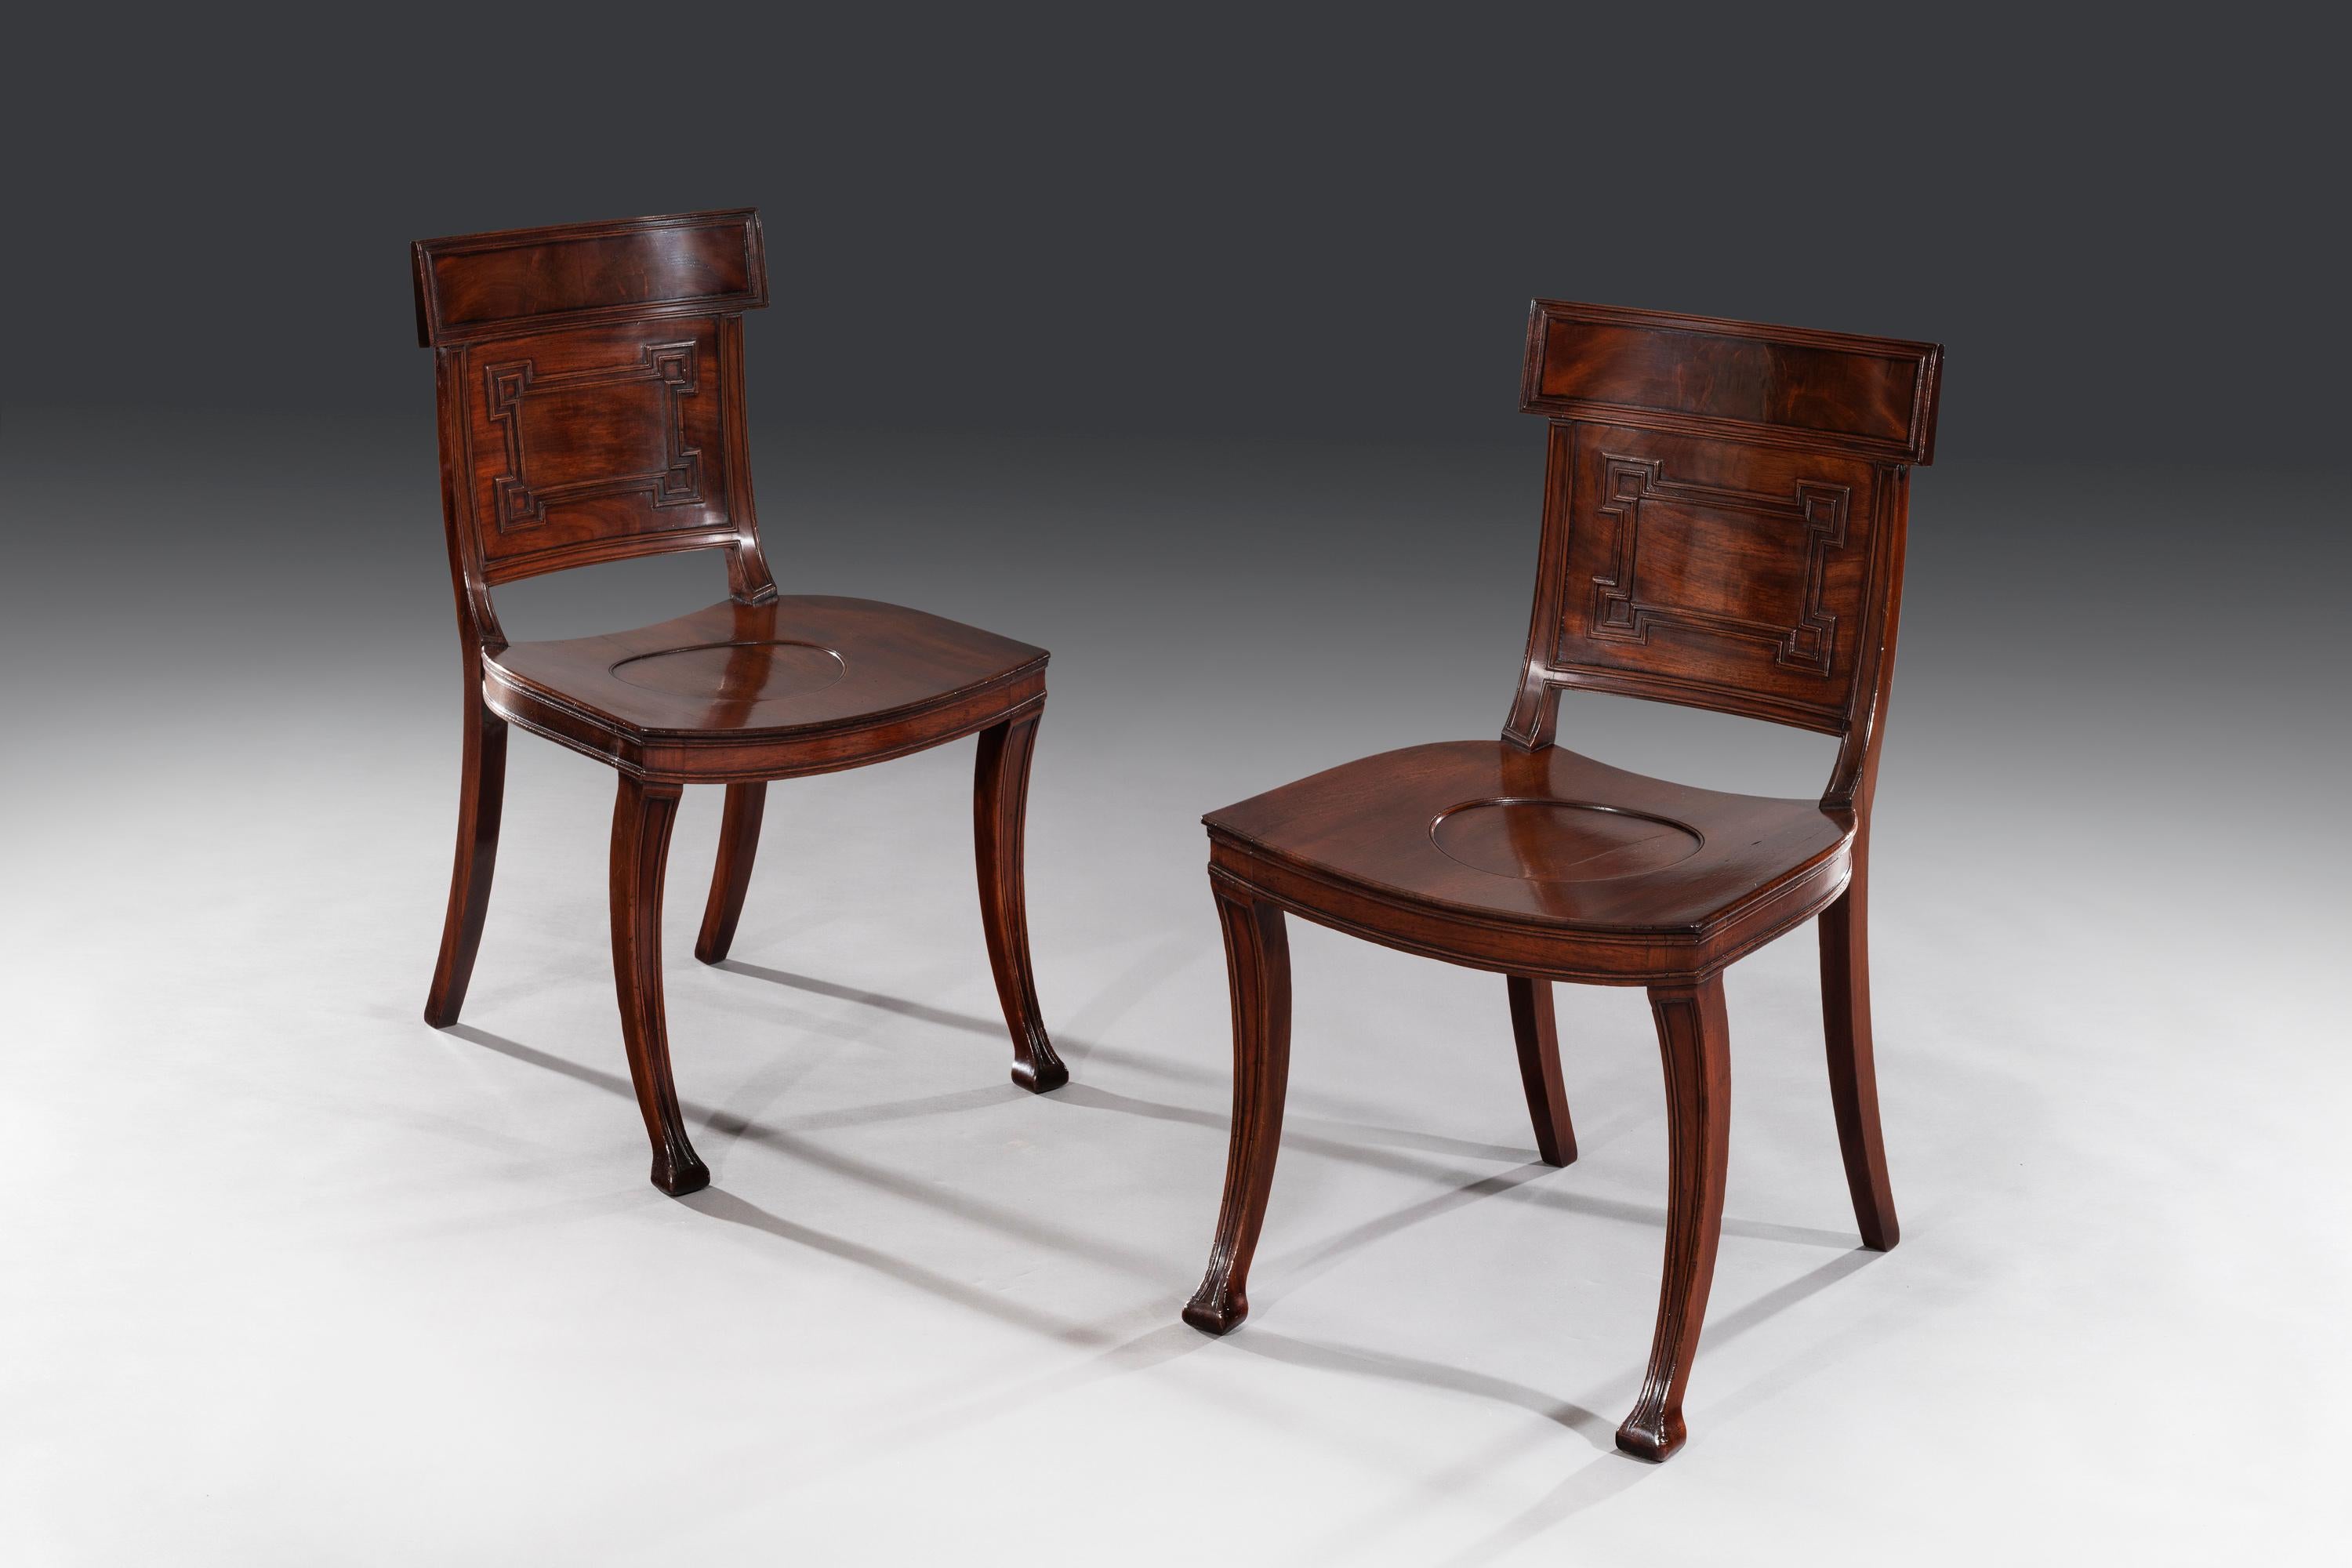 The mahogany veneered back splats sit above 'Greek Key' moulded backs and are flanked by reeded uprights. The saddle-shaped seat stands on sabre front legs and down-swept back legs, 

Elward, Marsh and Tatham, see C. Gilbert, Pictorial Dictionary